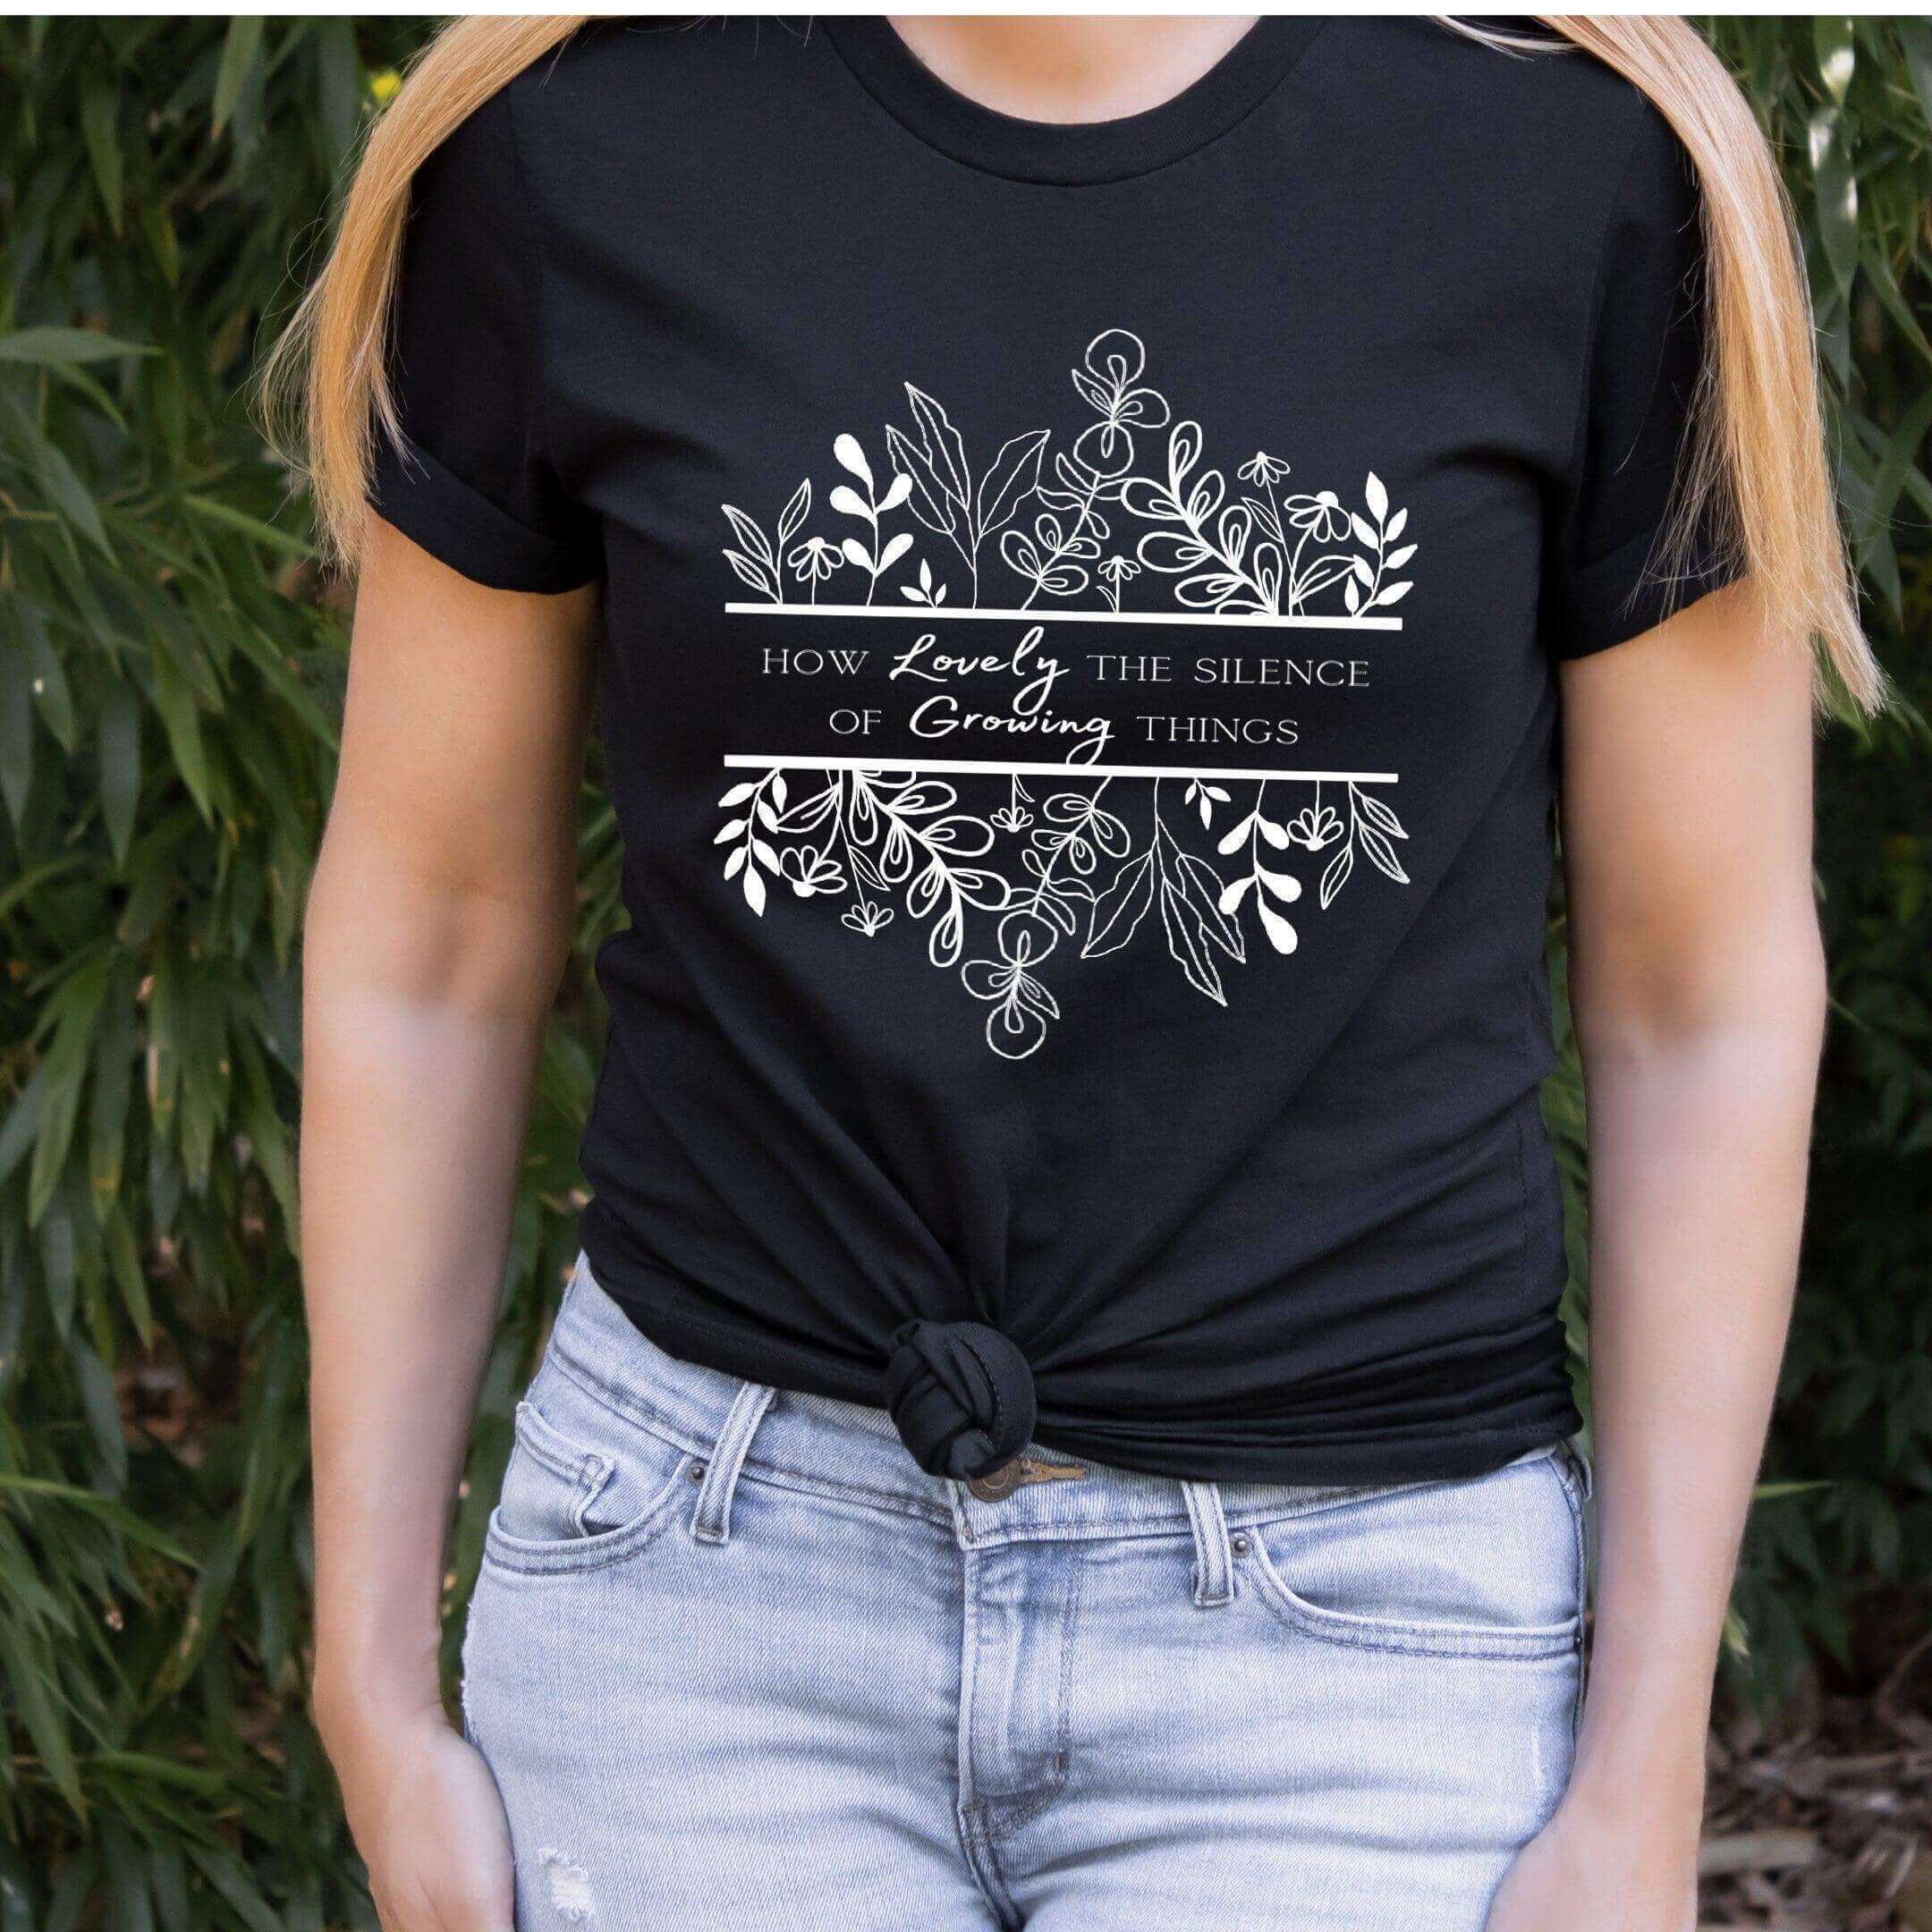 Botanical Line Drawing, Minimalist Flower Print Shirt, Garden Quotes, Gardeners Gift,  How Lovely the Silence of Growing Things - Winks Design Studio,LLC